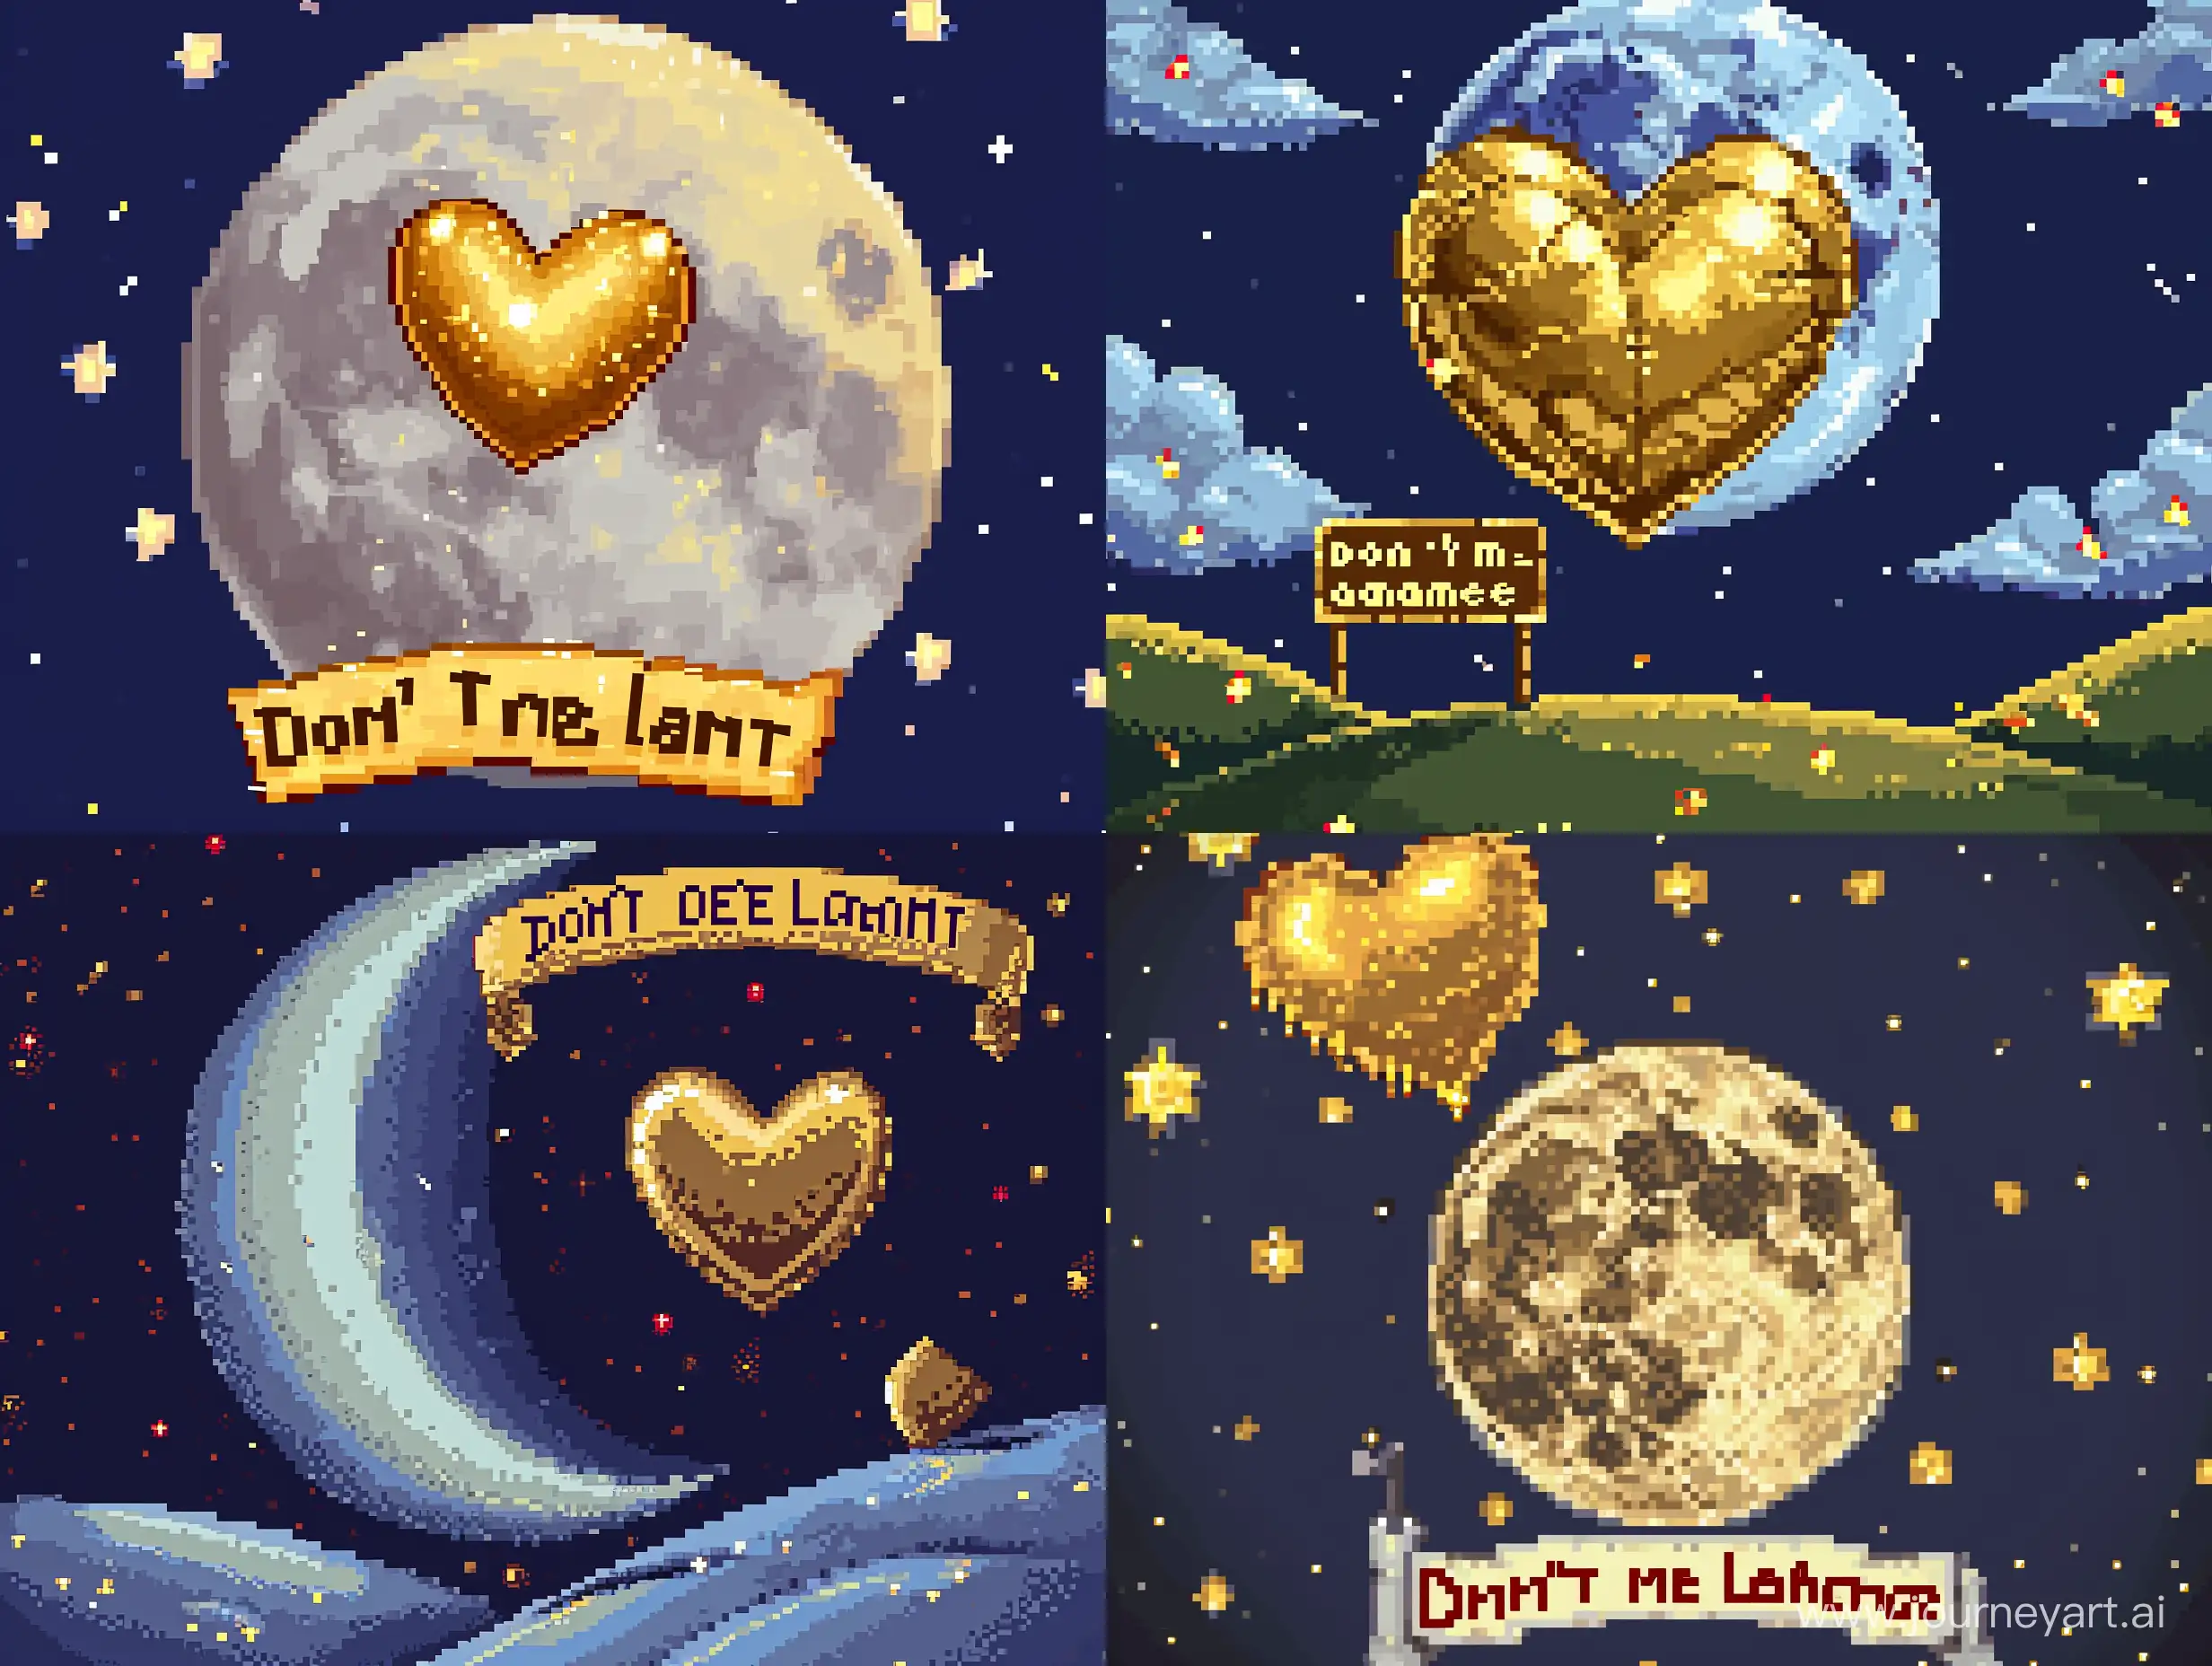 A pixel-art of a golden heart flying over the moon with a caption that reads "Don't leave me alone!"